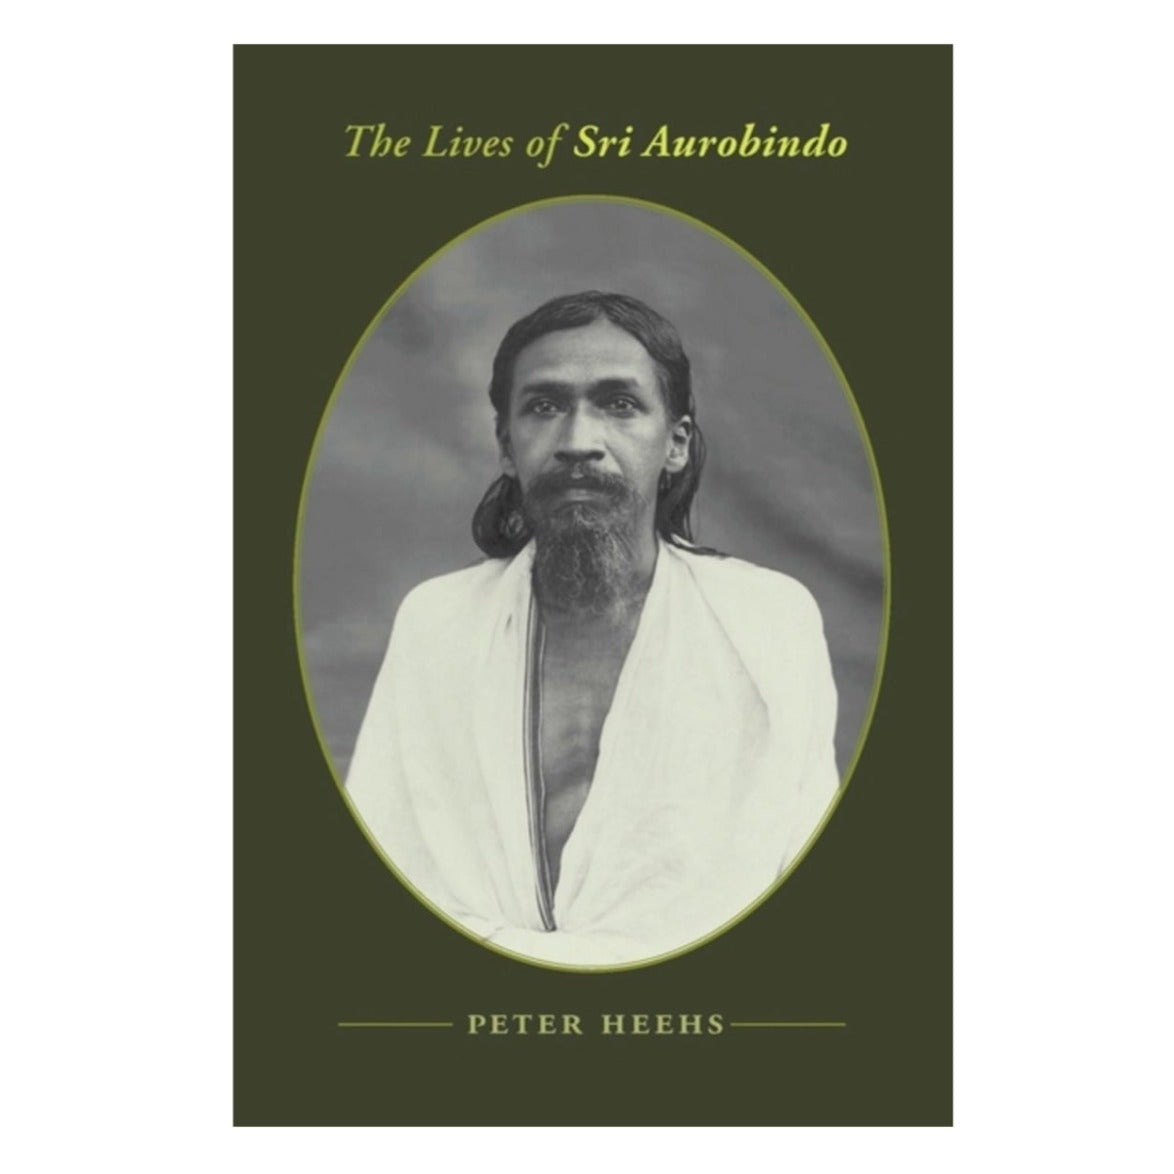 The Lives of Sri Aurobindo by Peter Heehs